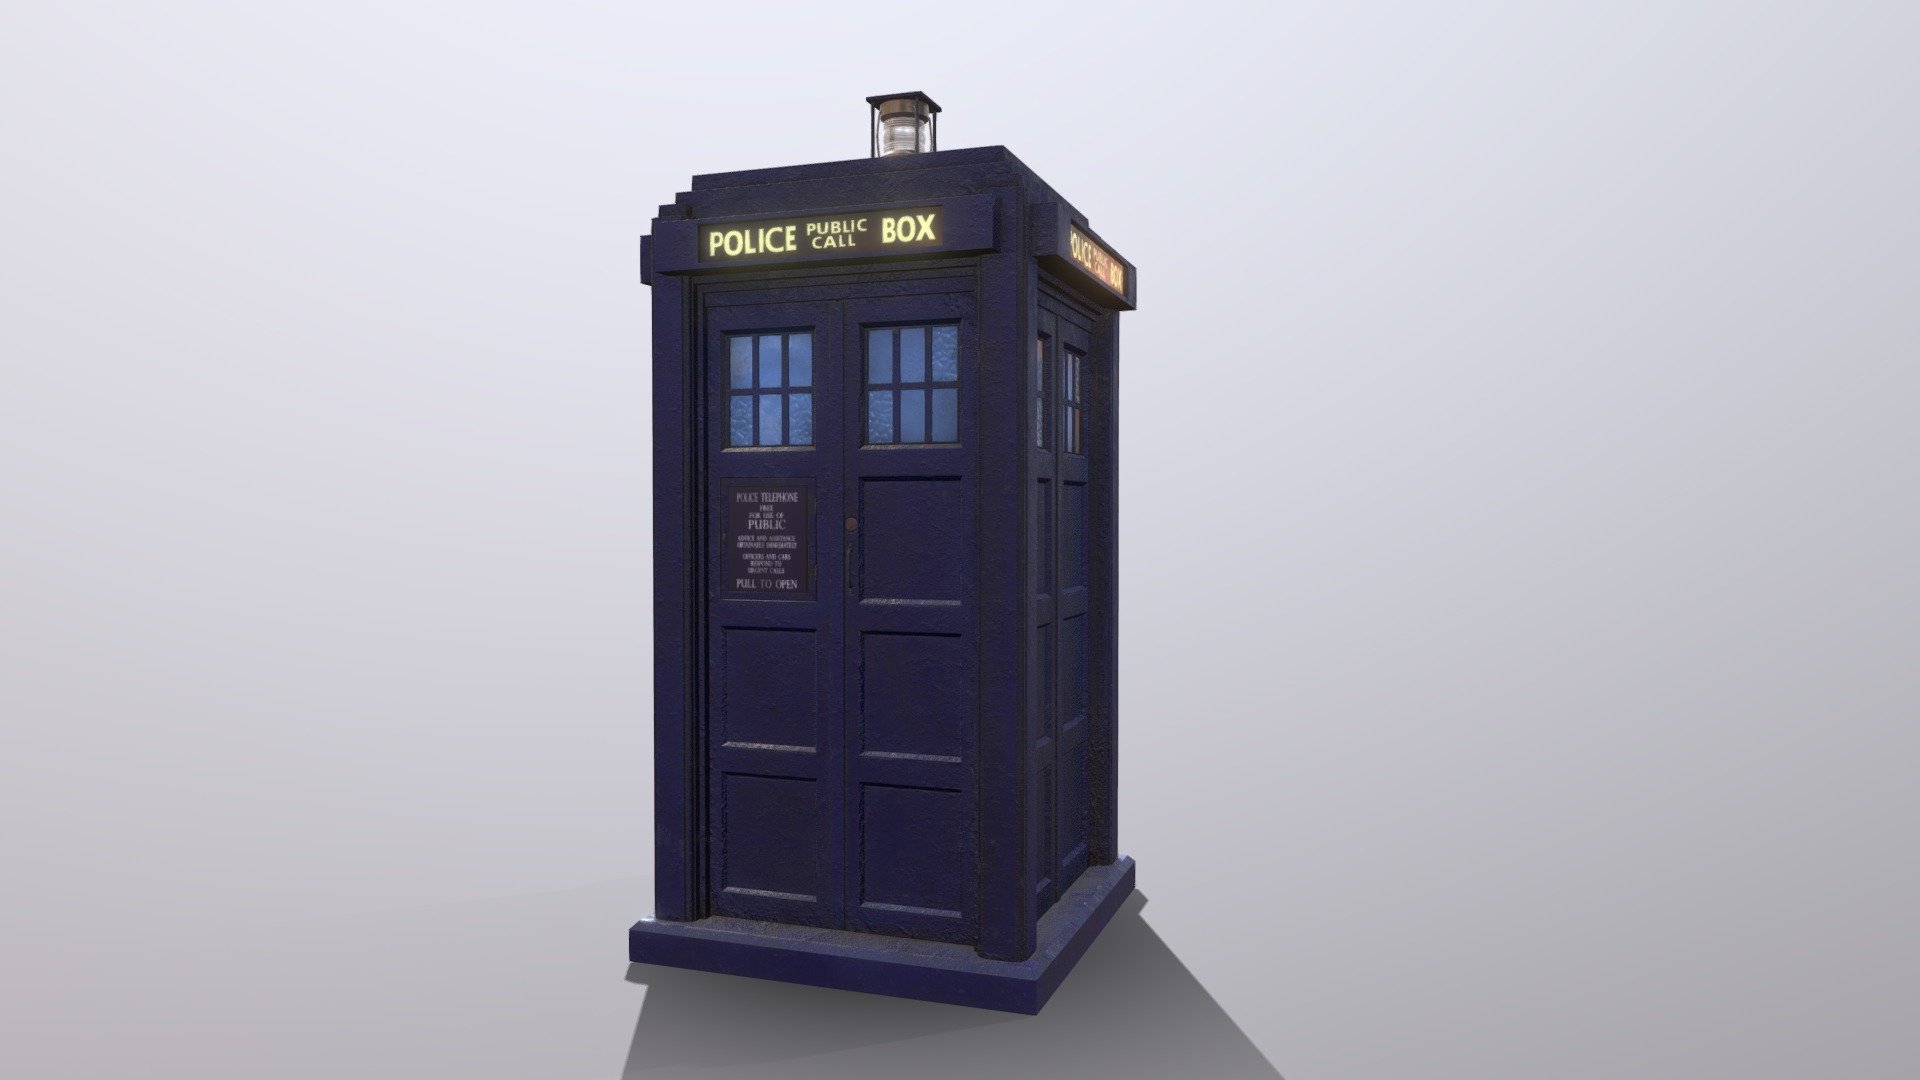 I love this version of the TARDIS from the 1996 Tv movie and so was very happy to find the plans for it on the TARDIS Builders website.

Full render here: https://www.instagram.com/reel/CyTlWsjoEx2/?utm_source=ig_web_copy_link&amp;igsh=MzRlODBiNWFlZA== - 8th Doctor TARDIS (1996) - 3D model by Conor Norwood (@ConorNorwood) 3d model